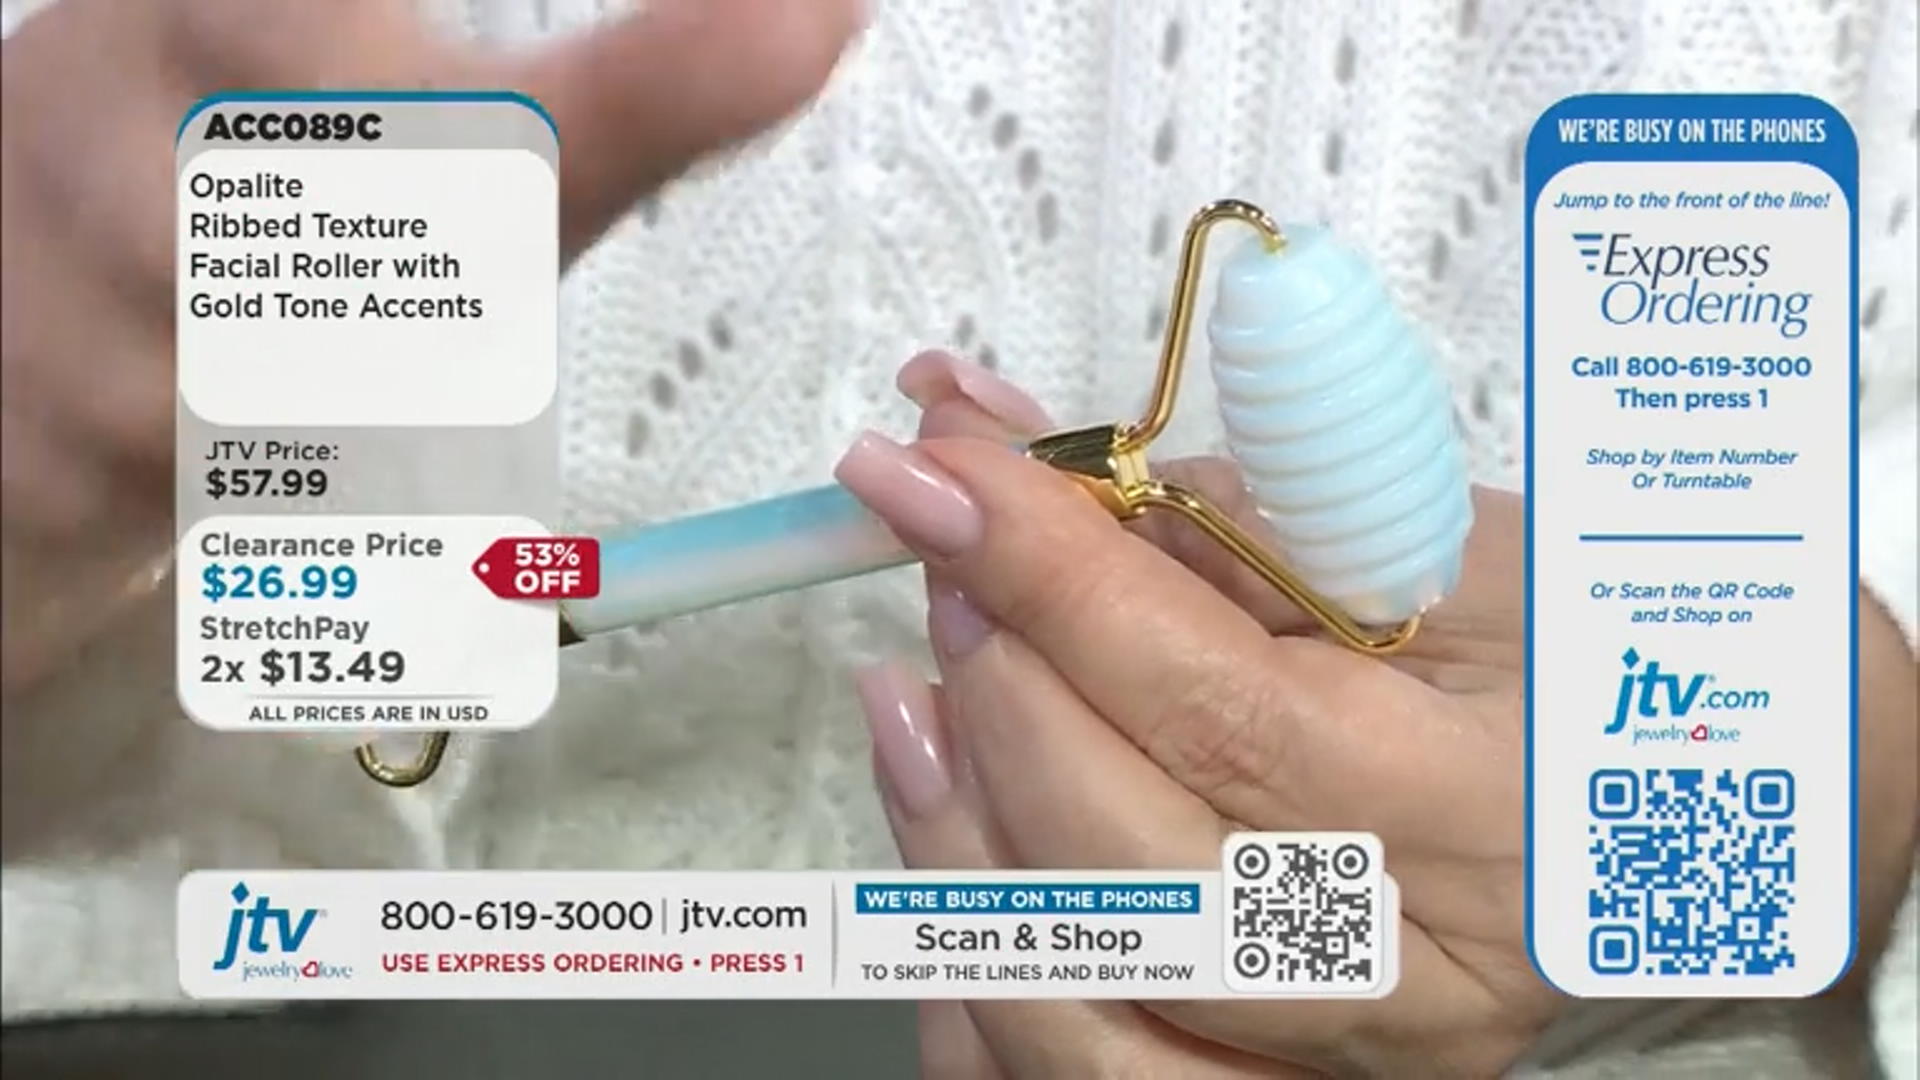 Opalite Ribbed Texture Facial Roller with Gold Tone Accents Video Thumbnail